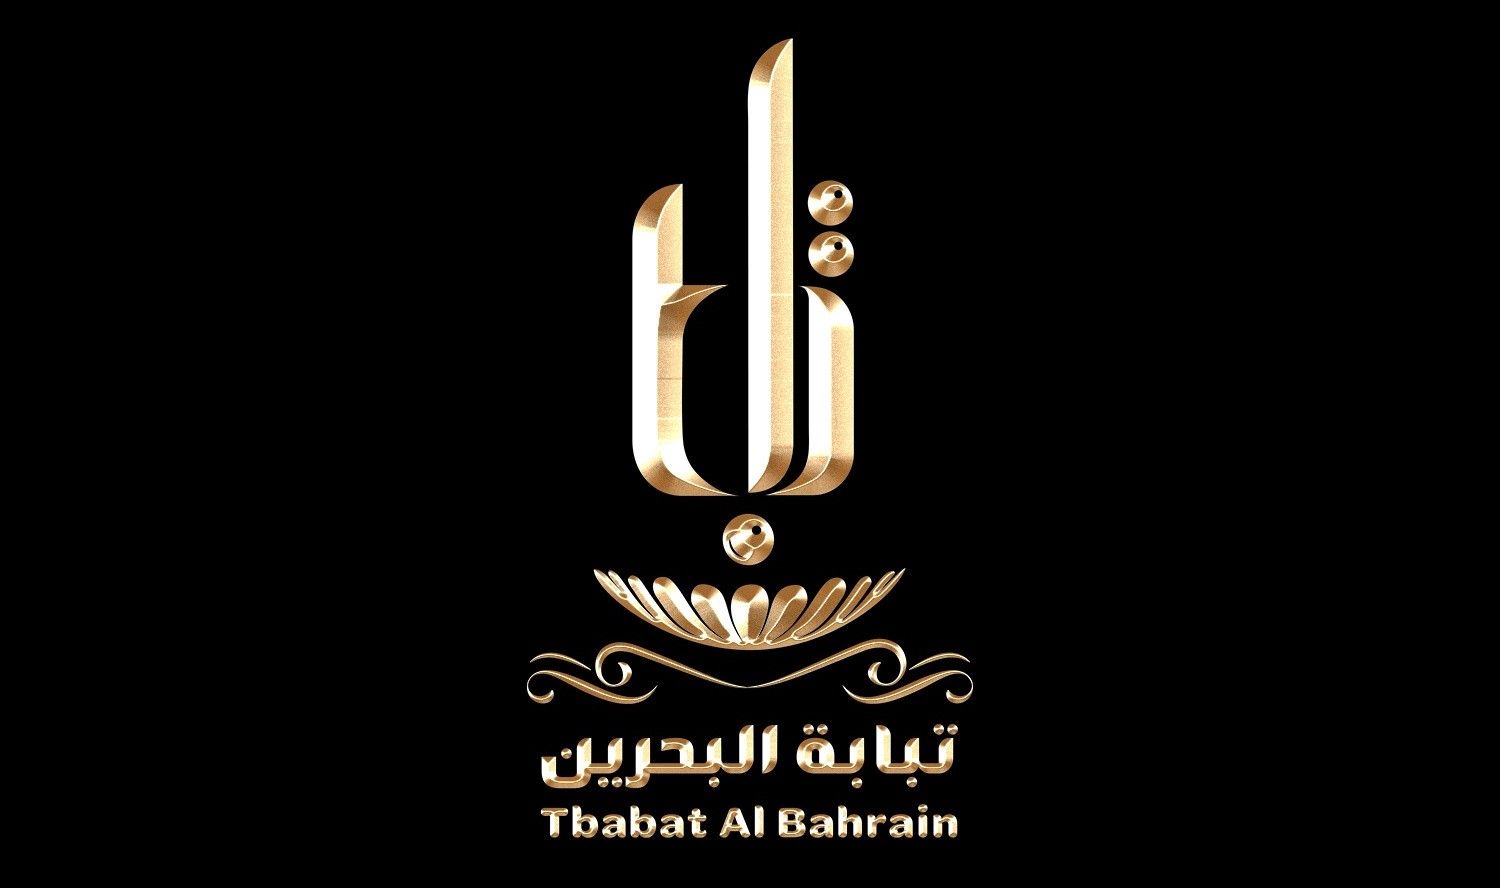 Tbabat AlBahrain for Jewelry